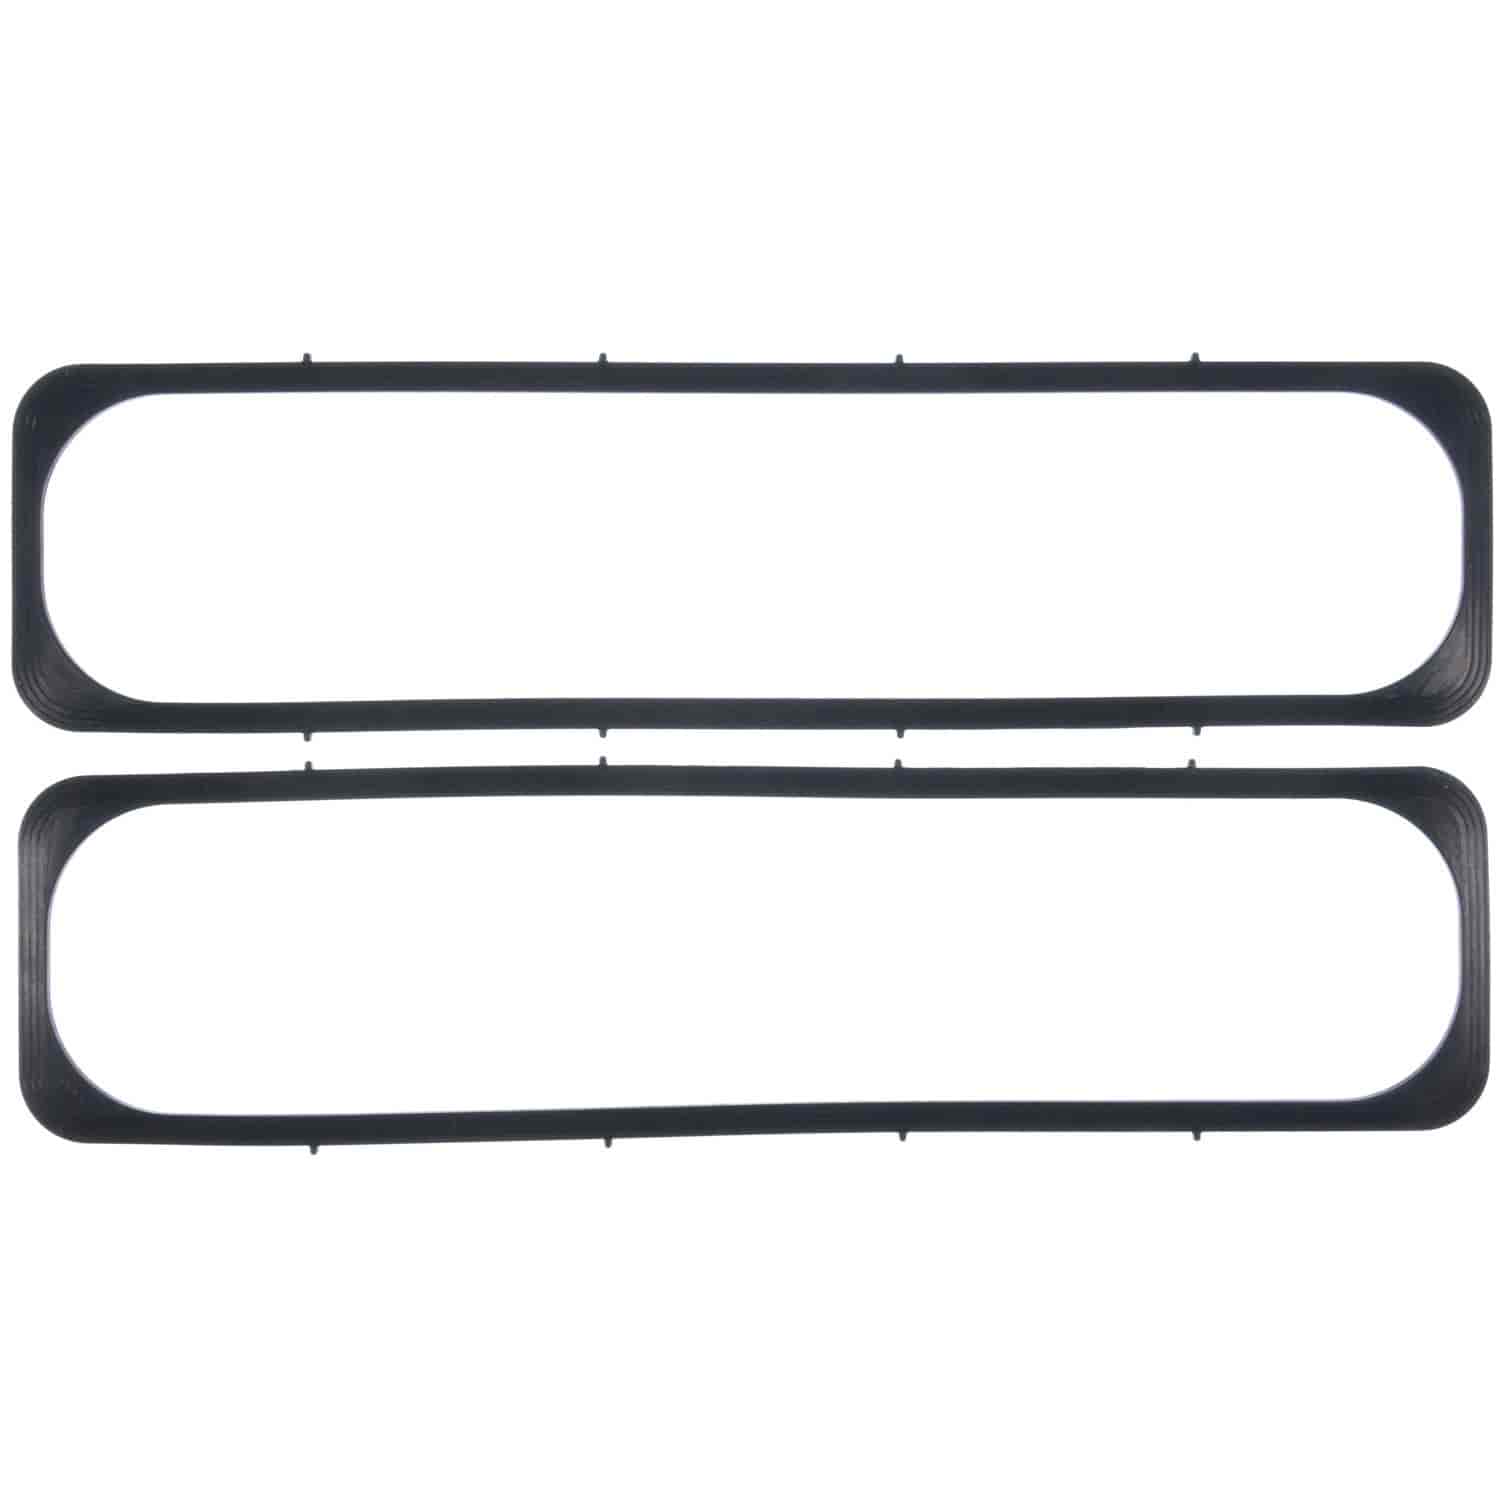 Valve Cover Gasket Set 1987-2002 Small Block Chevy 305/350 (5.0/5.7L) Center Bolt Valve Covers in Molded Rubber